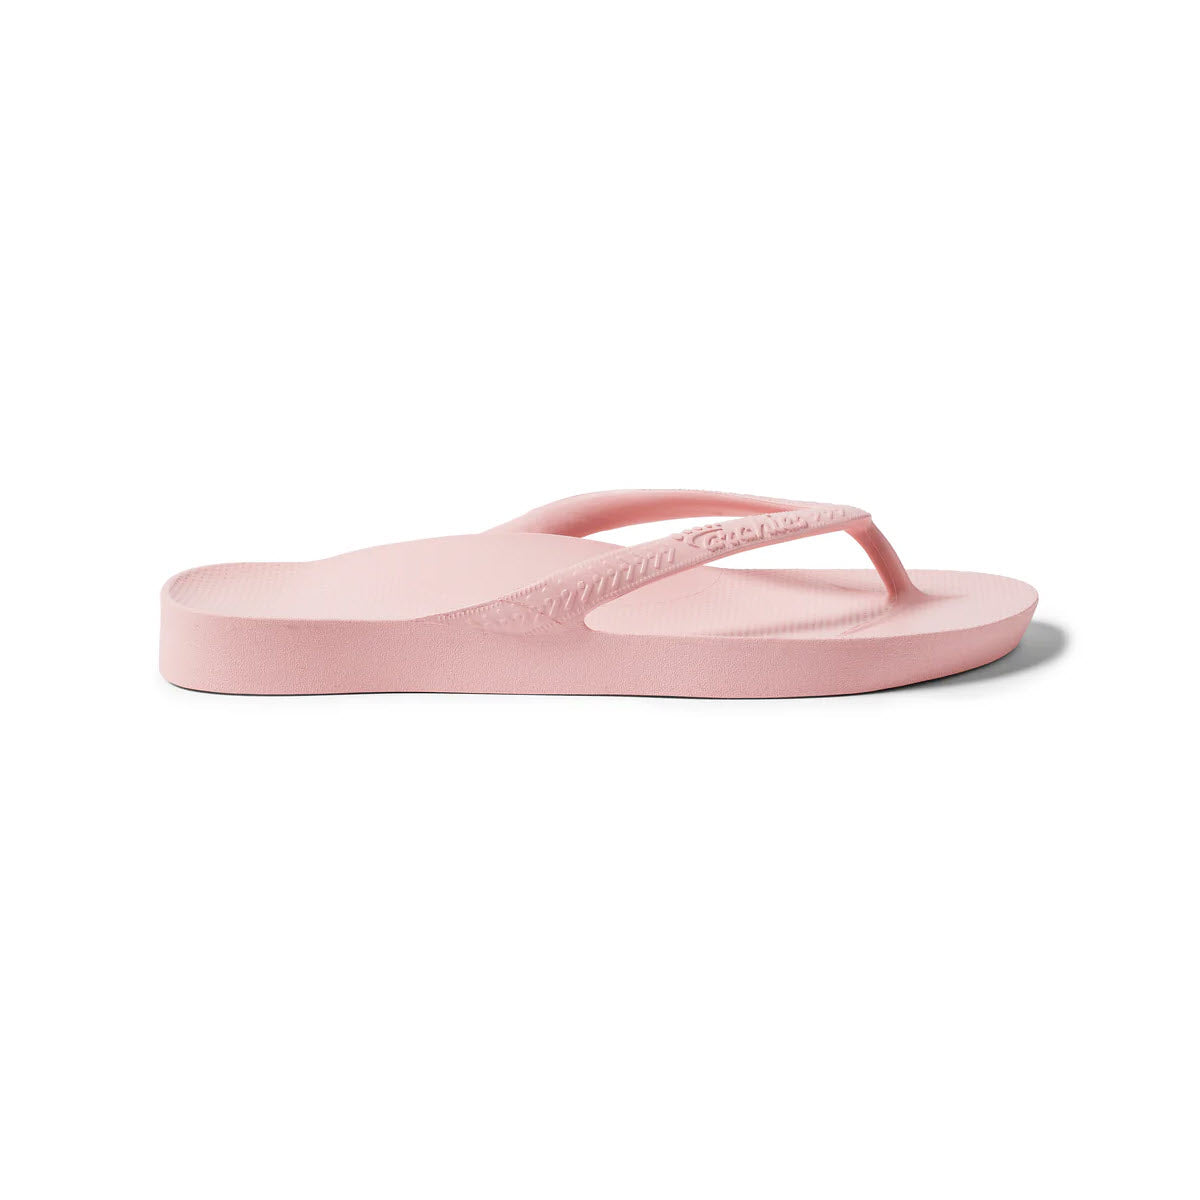 A single ARCHIES flip-flop sandal in pink, positioned at an angle on a white background.